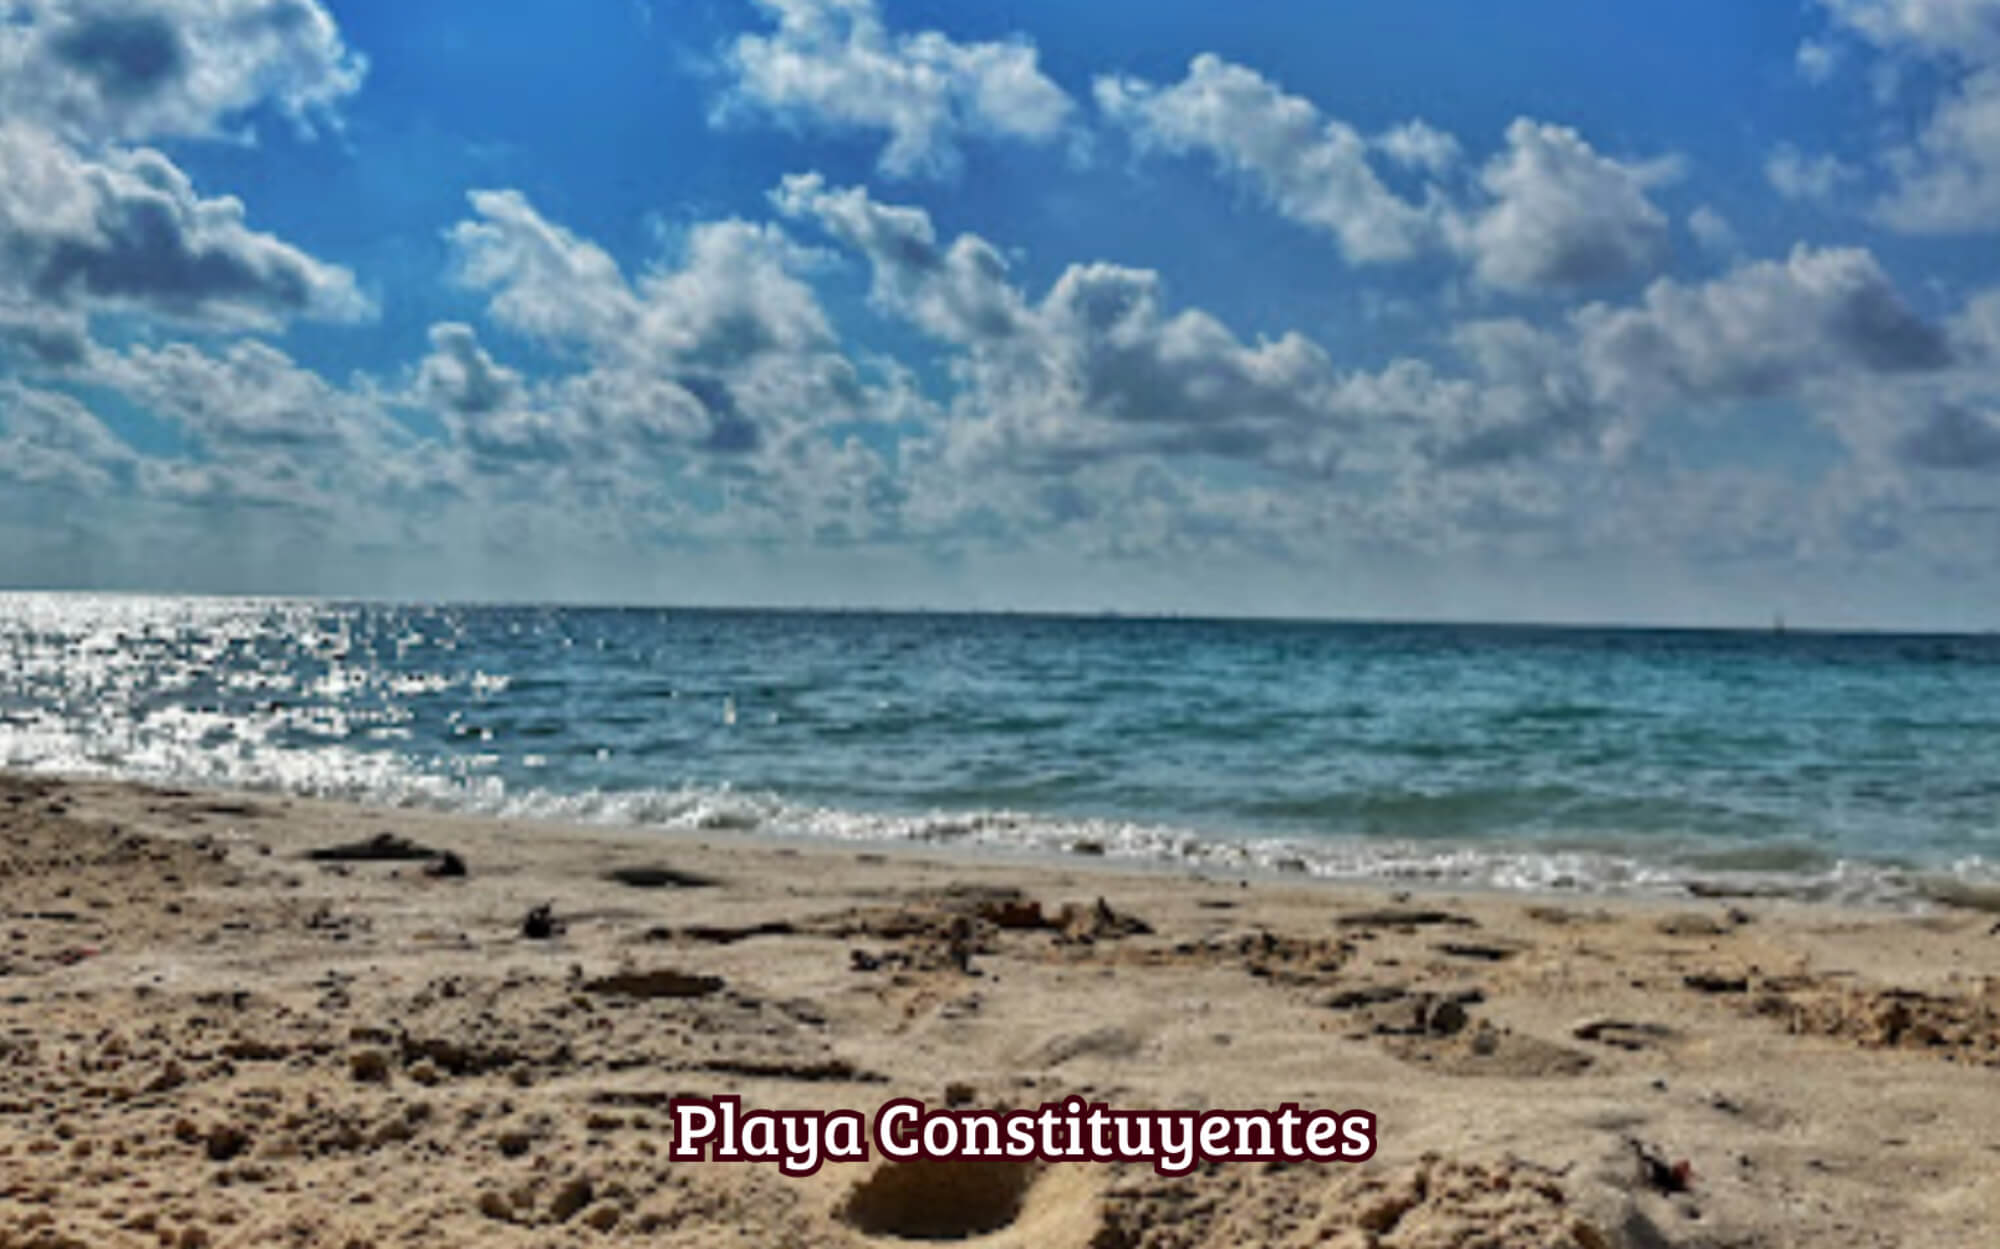 Condo with club house, 20,000 m2 of green areas, pool, playground, gym, dog park and more for sale Playa del Carmen